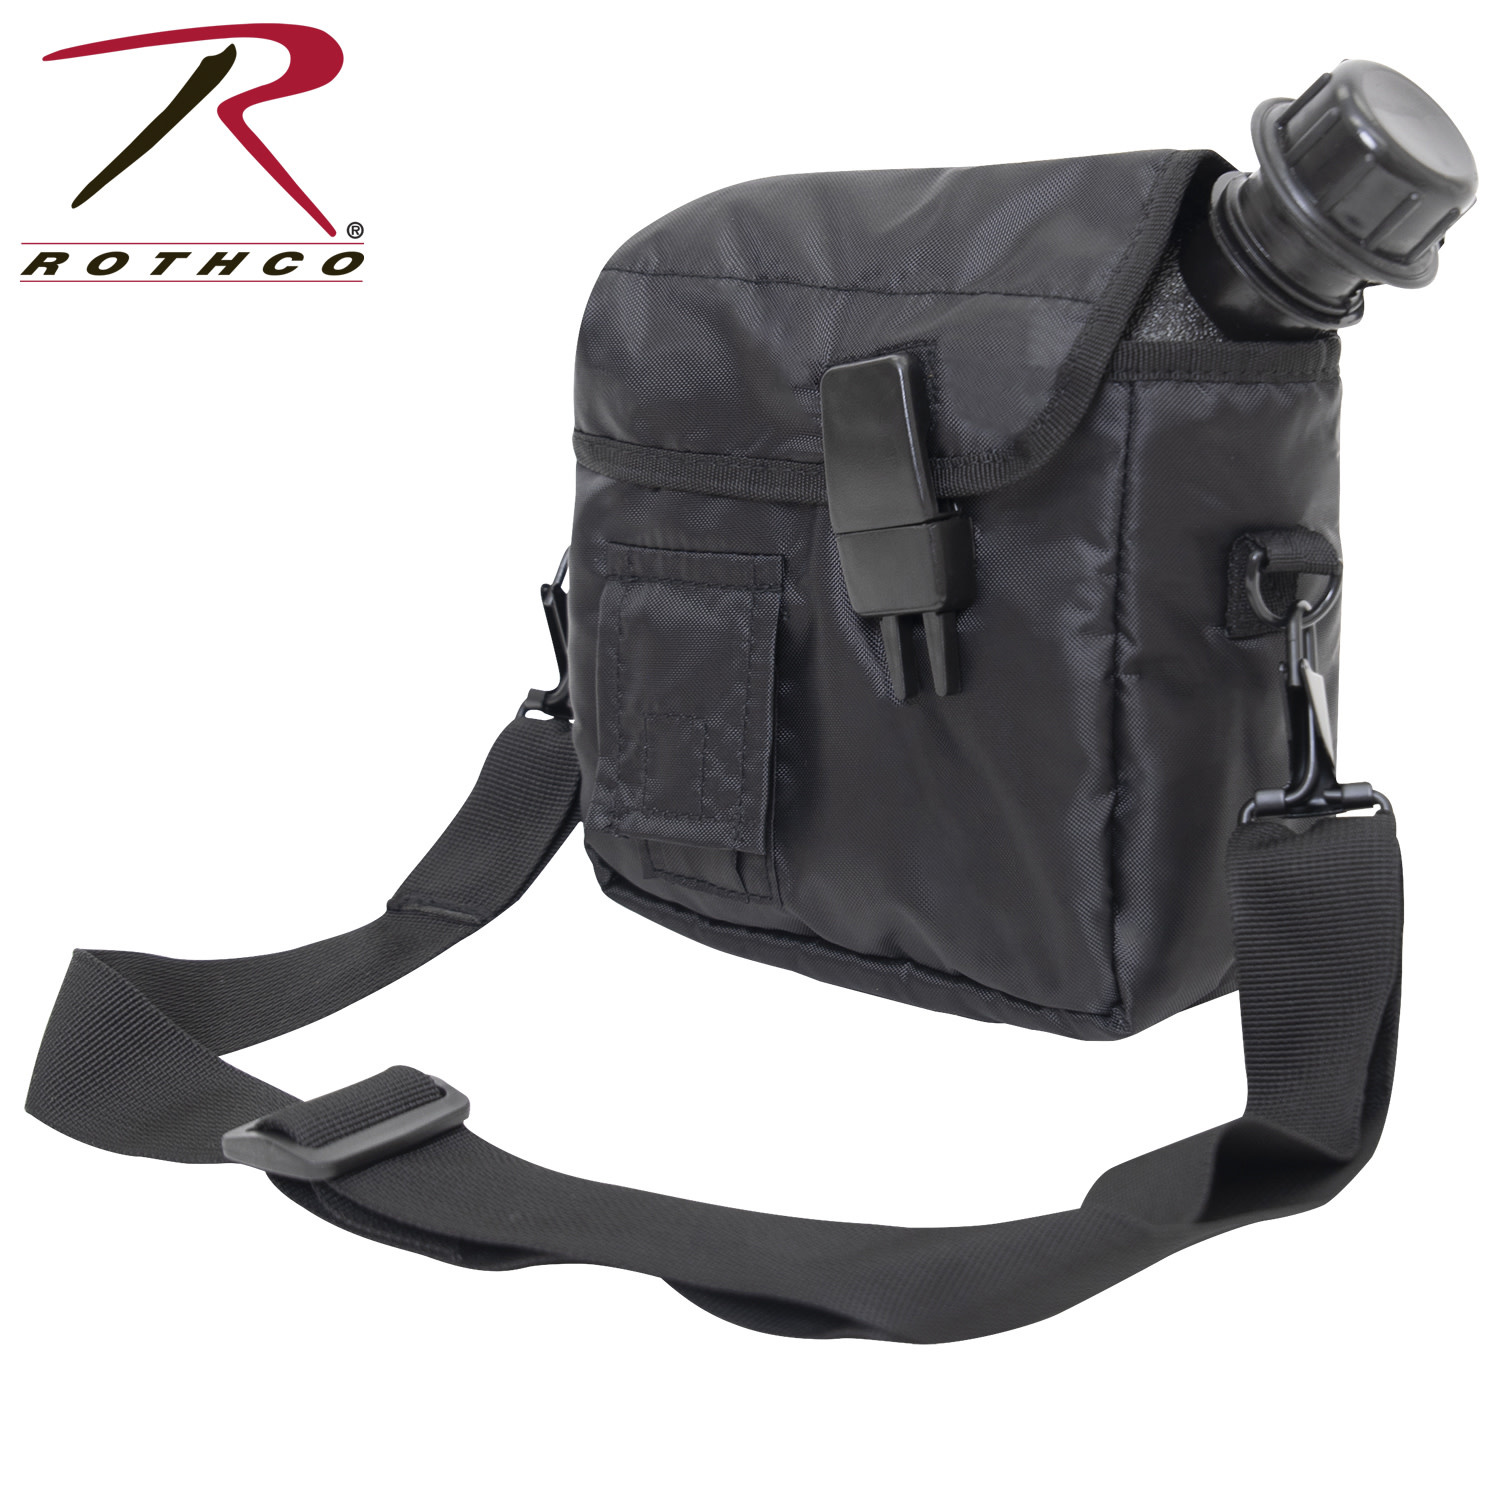 Rothco GI Type 2 QT Bladder Canteen Cover